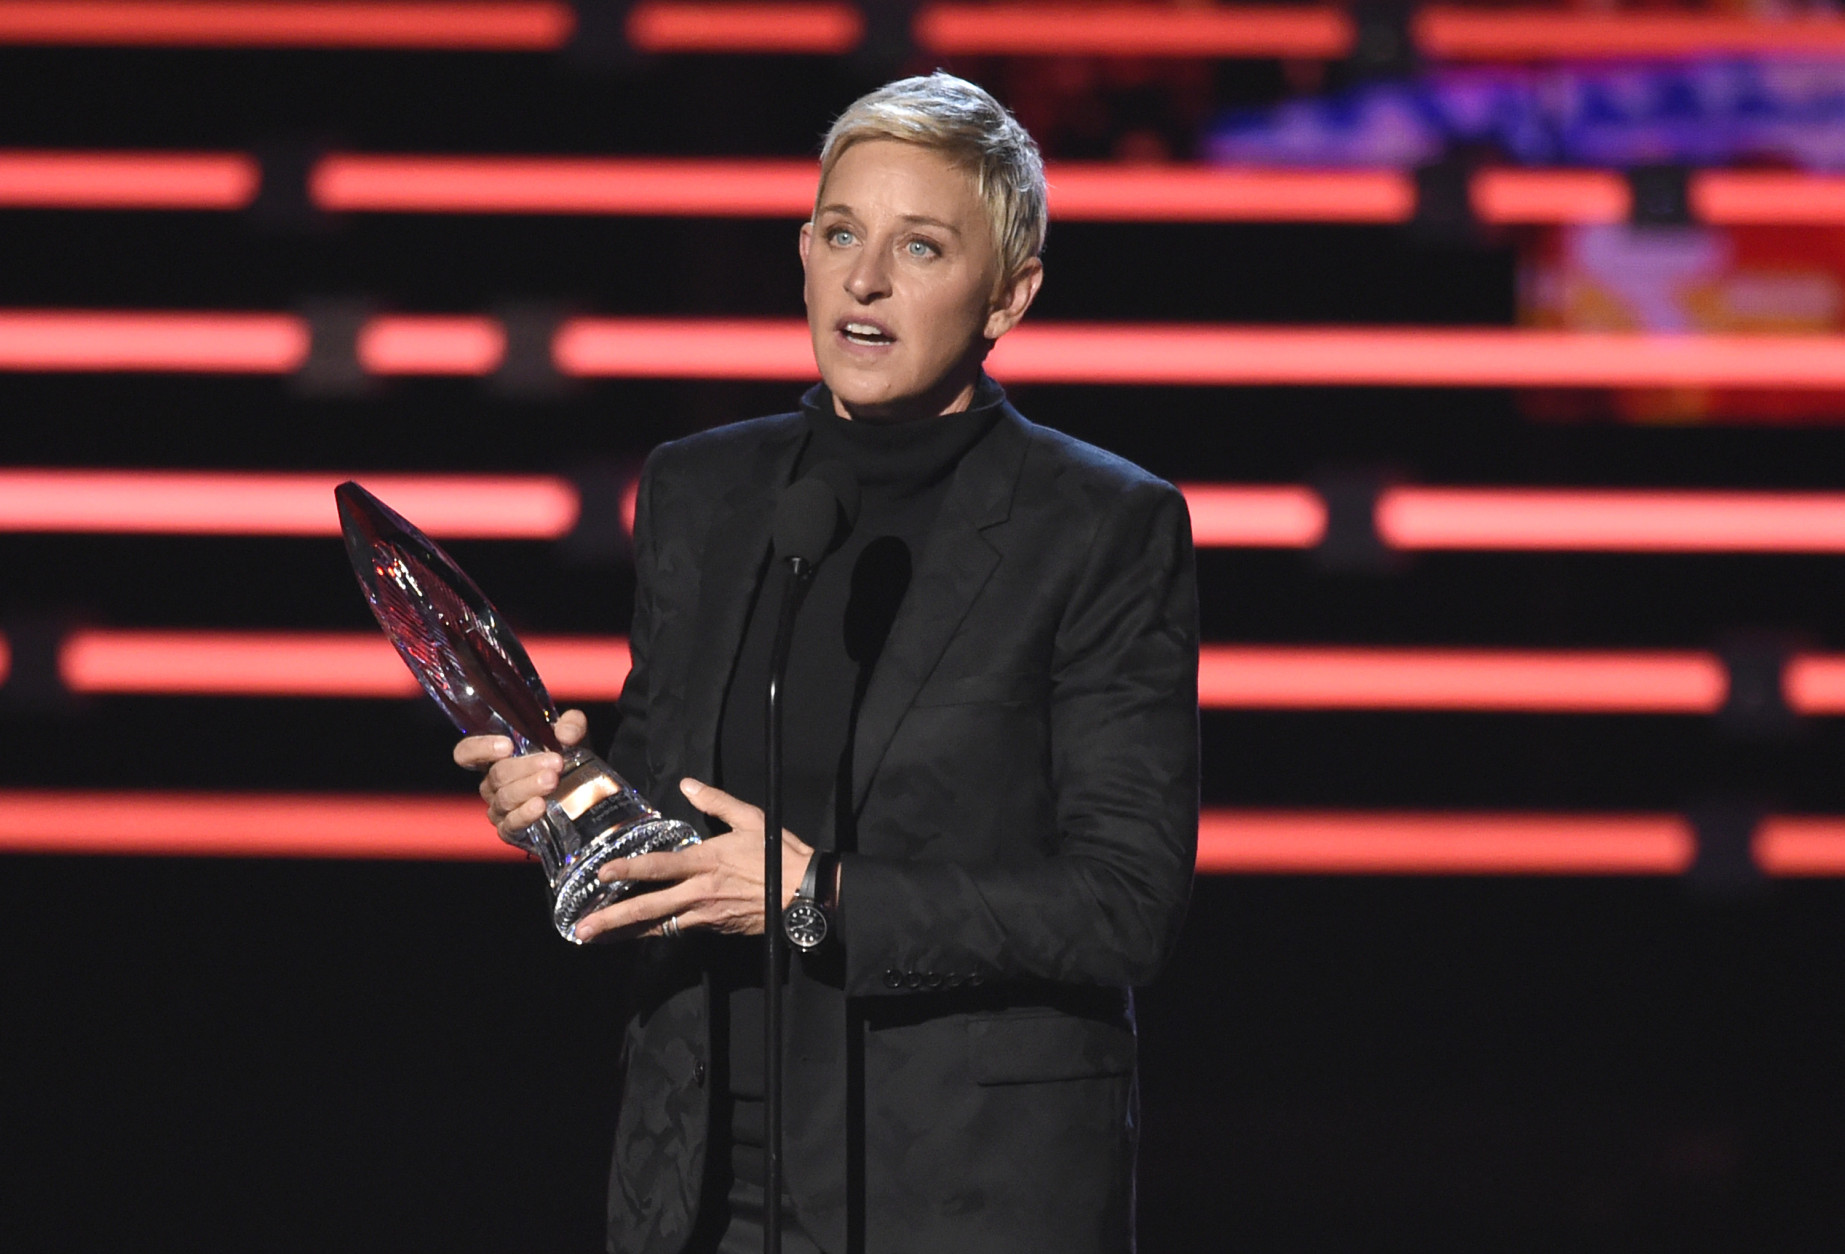 Ellen DeGeneres accepts the award for favorite humanitarian at the People's Choice Awards at the Microsoft Theater on Wednesday, Jan. 6, 2016, in Los Angeles. (Photo by Chris Pizzello/Invision/AP)